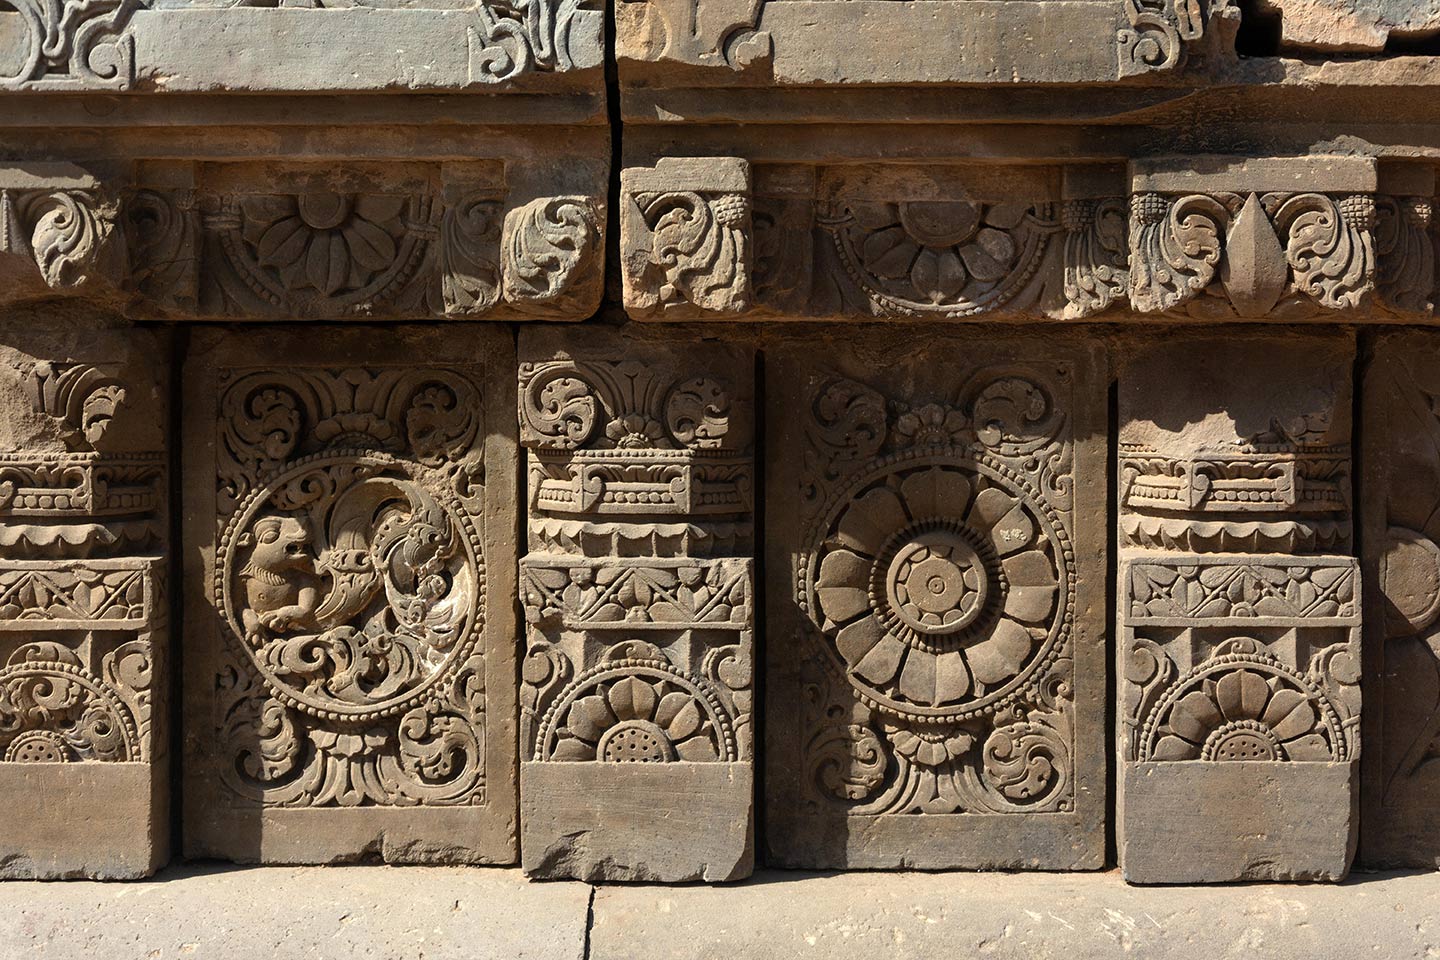 The plaque (on the left) has a depiction of simha (lion) vyala, integrated with creeper motifs that fill the rest of the medallion. The plaque, on the right, features the ashtadal kamal (lotus with eight petals). The plaques are separated by squat pillars which have a square base, an octagonal shaft, and a square capital. The pillars are decorated with ardha padma (half lotus) and kalpa lata (creeper) motifs.